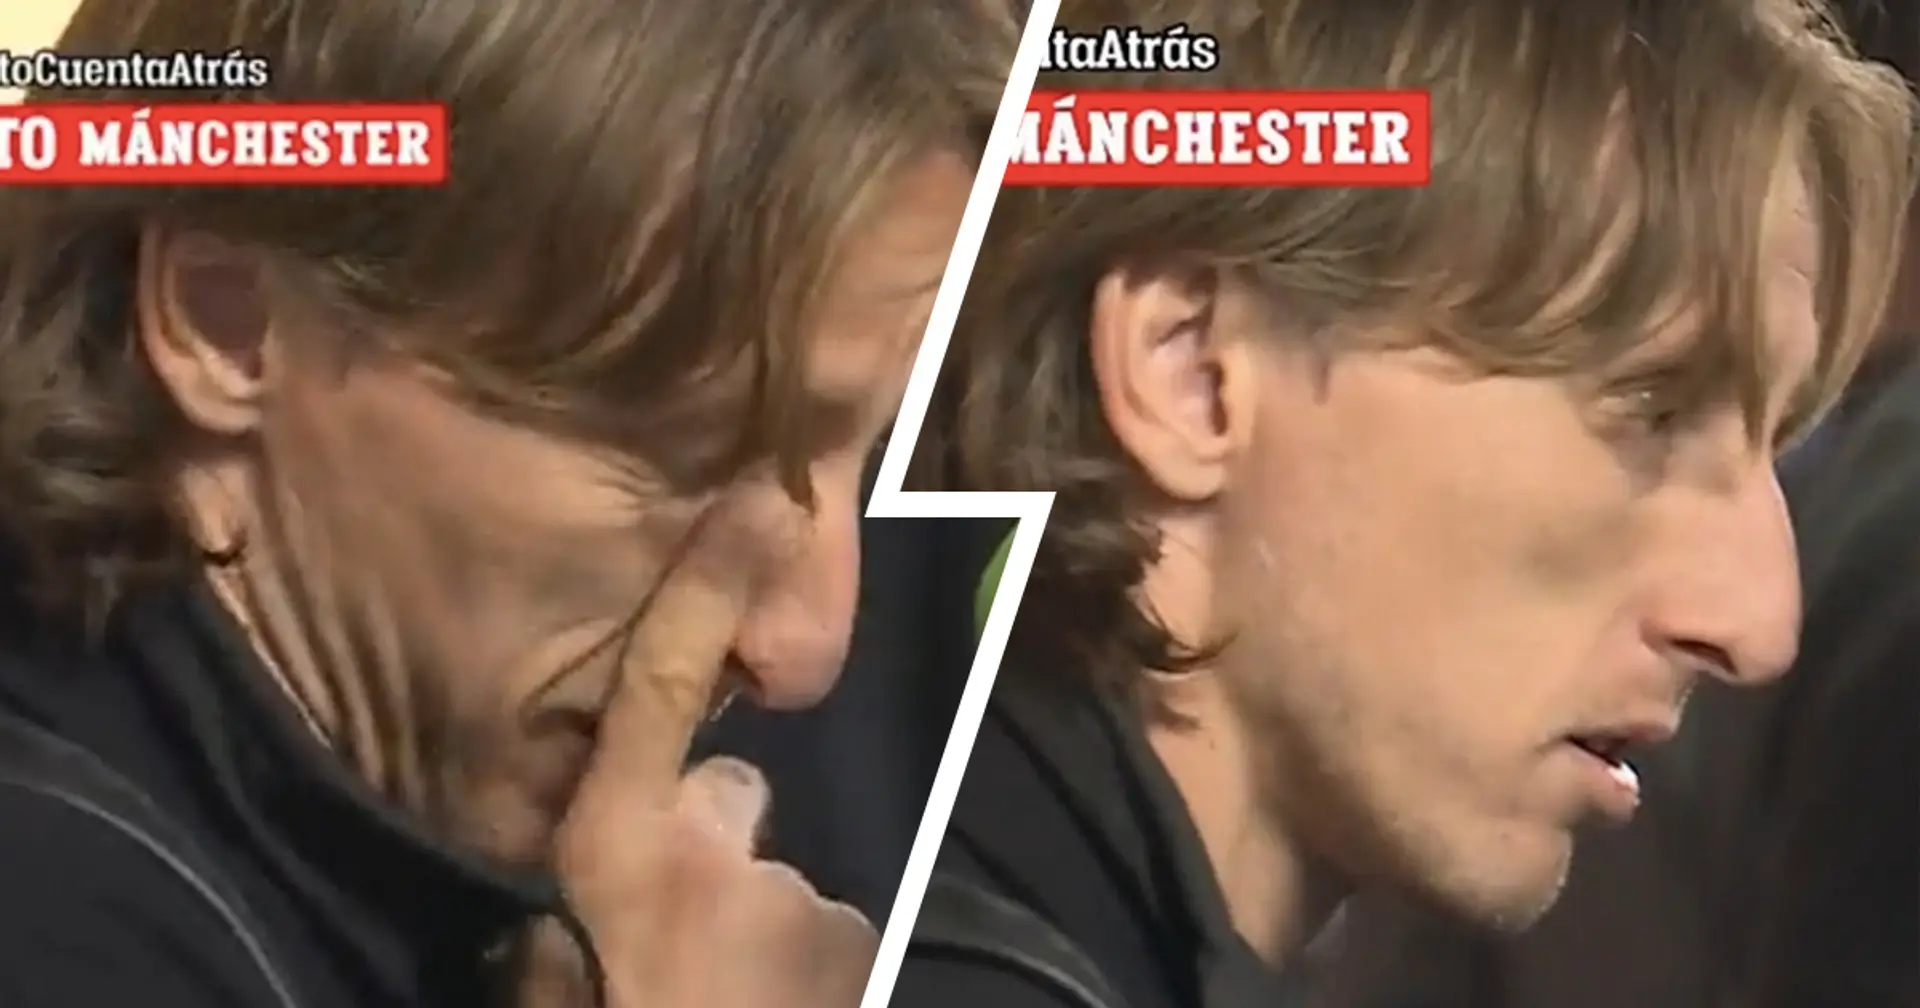 Modric in tears after Man City collapse, admits this may be 'end of an era'